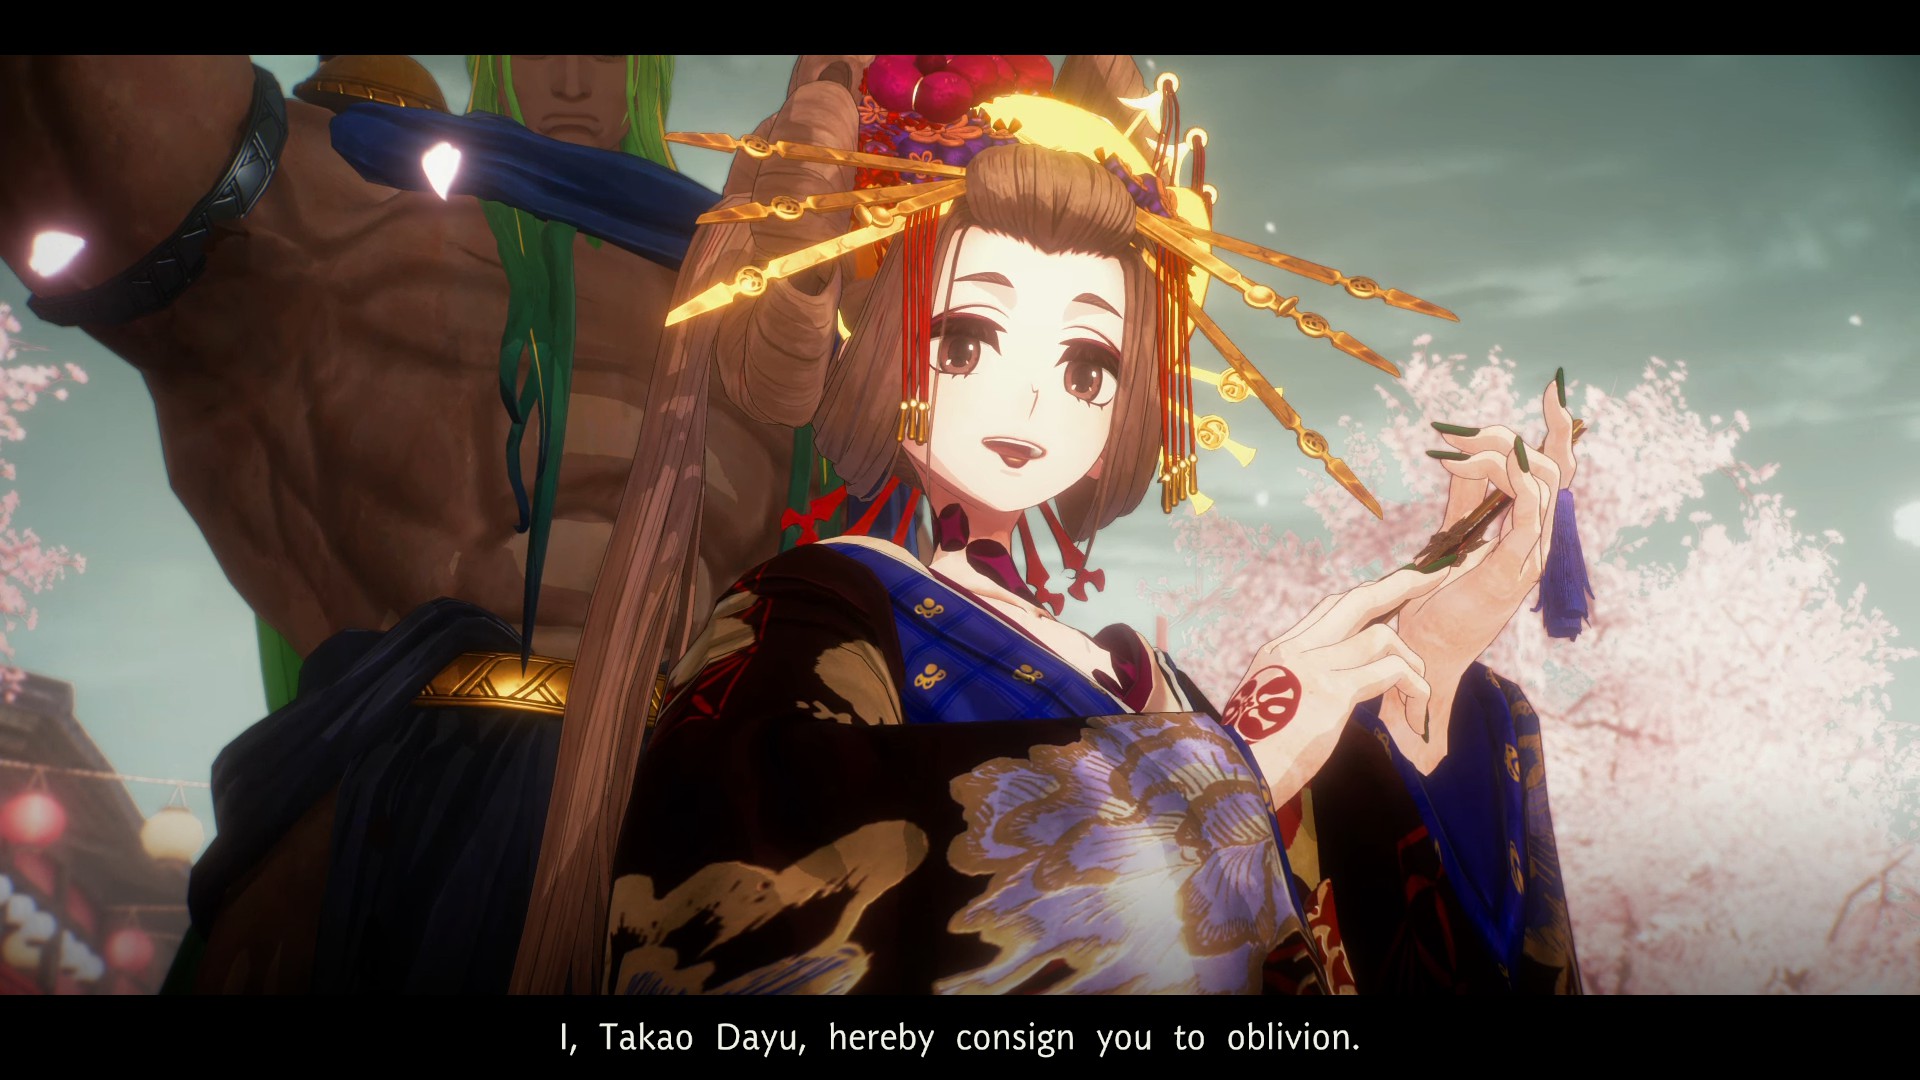 Fate/Samurai Remnant brings Waxing Moon brawls by night, and bustling Edo  life by day